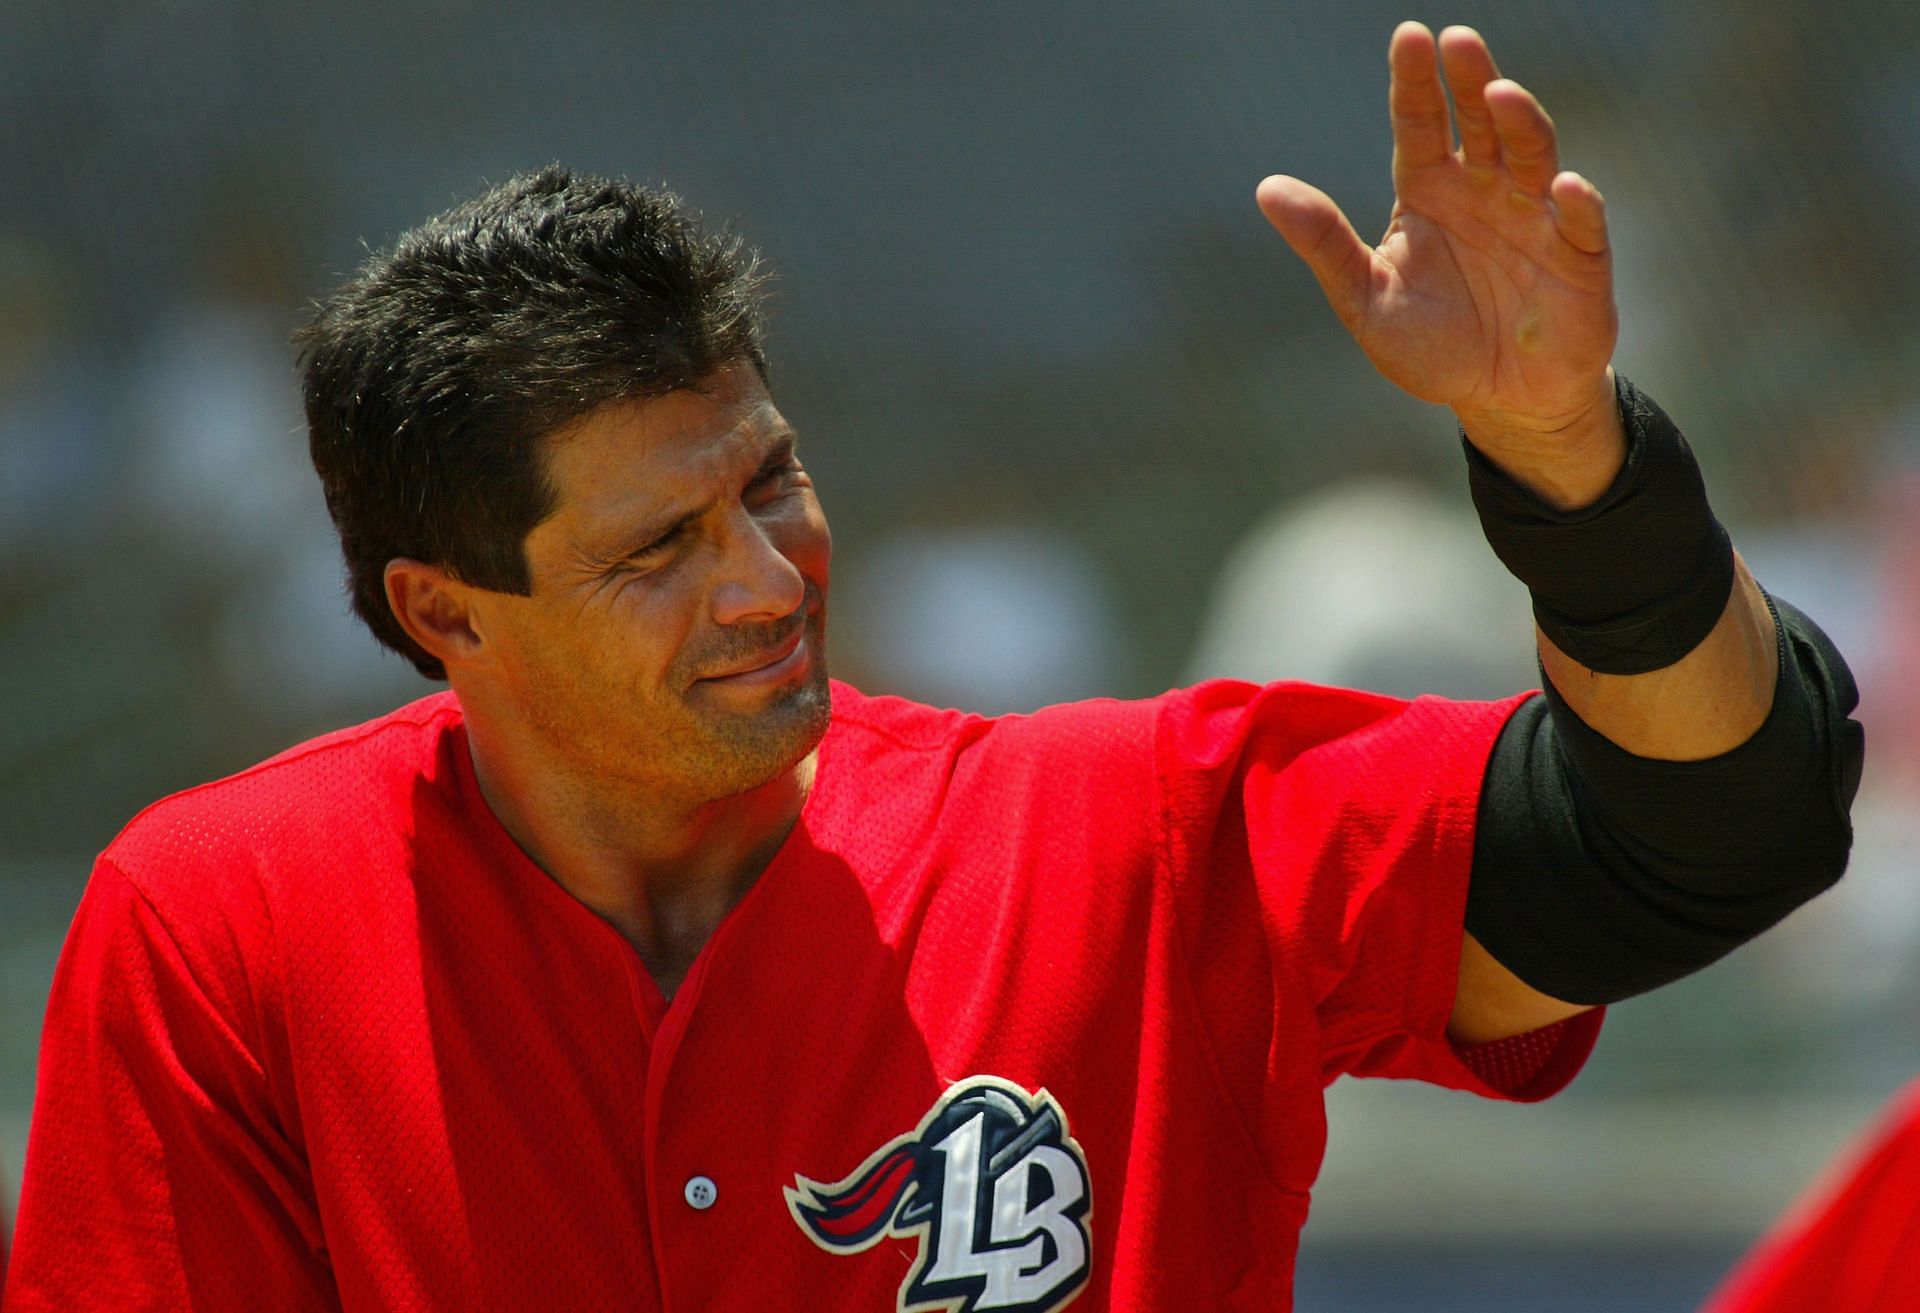 Jose Canseco played in the Golden Baseball League after his MLB days.